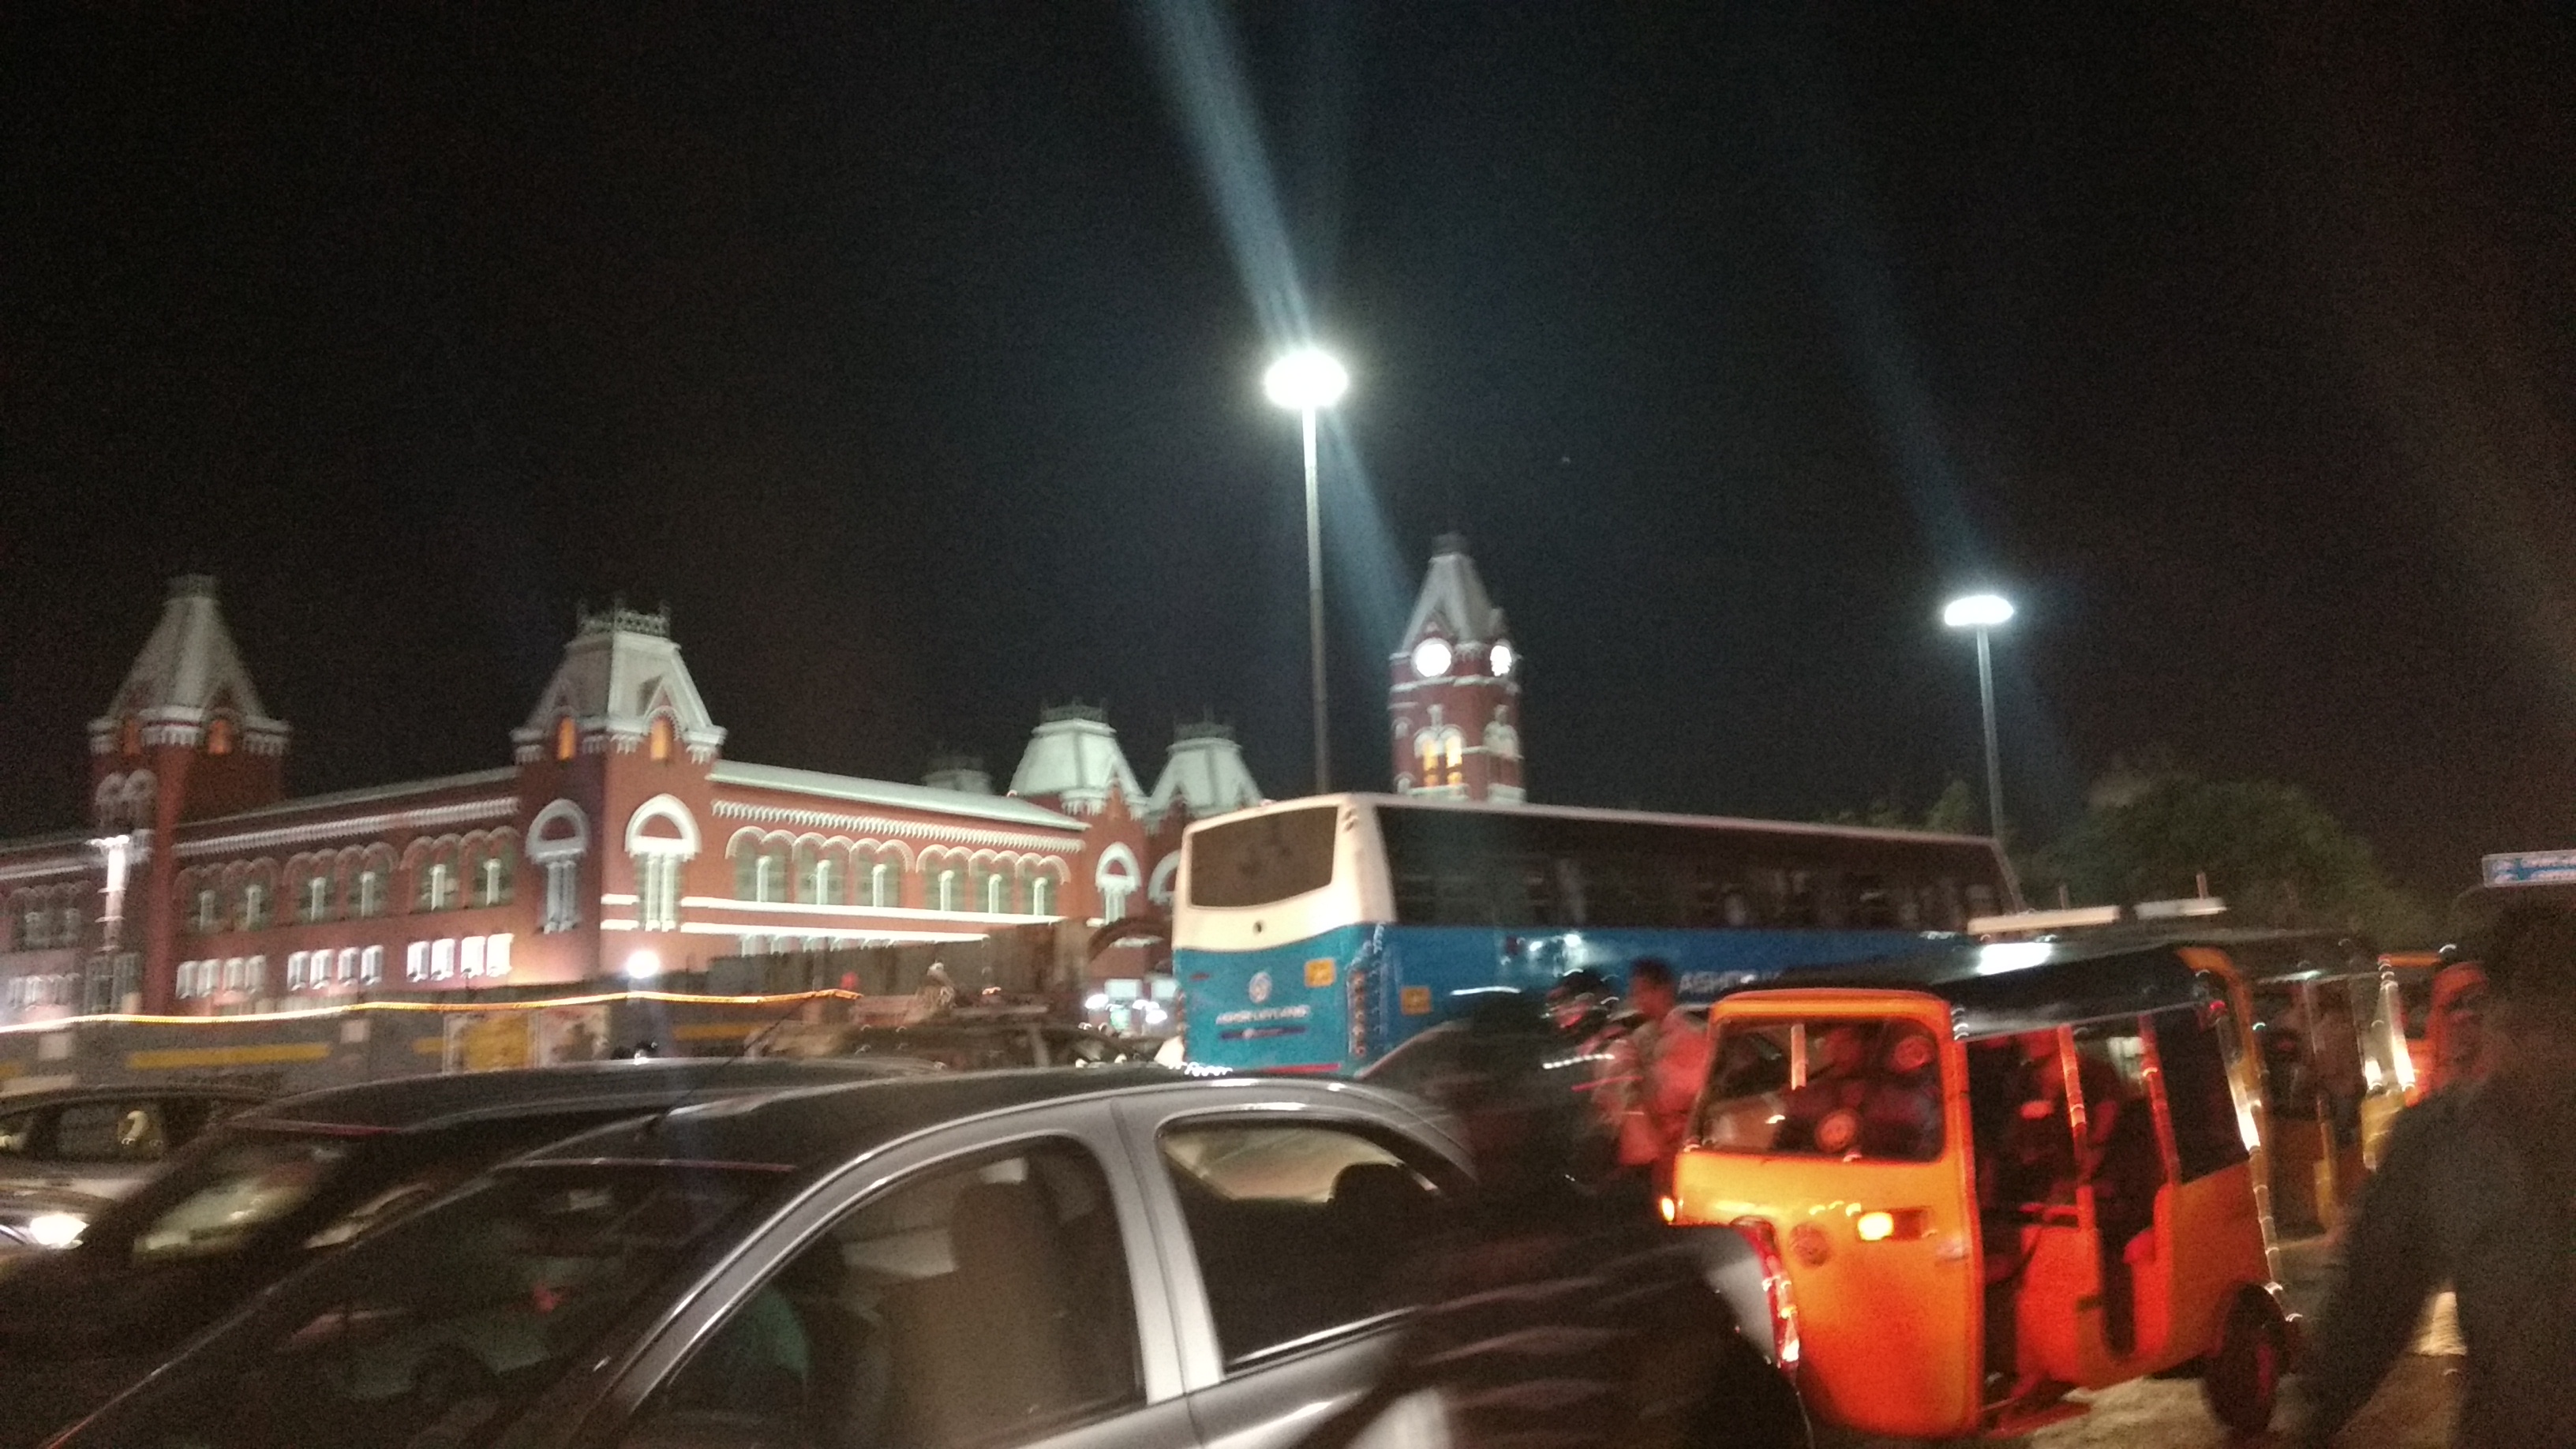 Chennai central and nearby areas photo